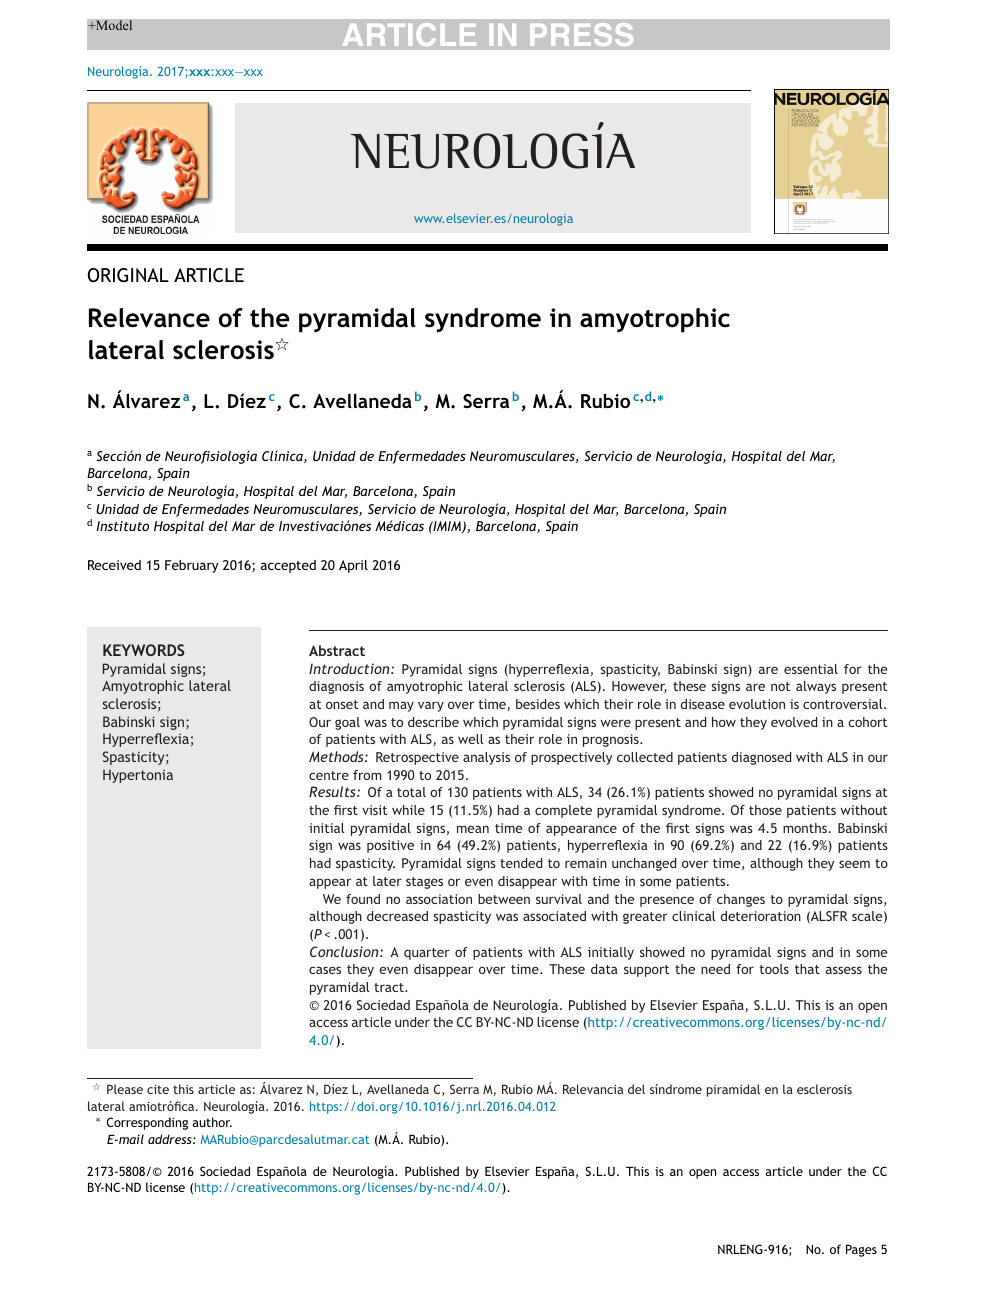 Relevance Of The Pyramidal Syndrome In Amyotrophic Lateral Sclerosis Topic Of Research Paper In Clinical Medicine Download Scholarly Article Pdf And Read For Free On Cyberleninka Open Science Hub